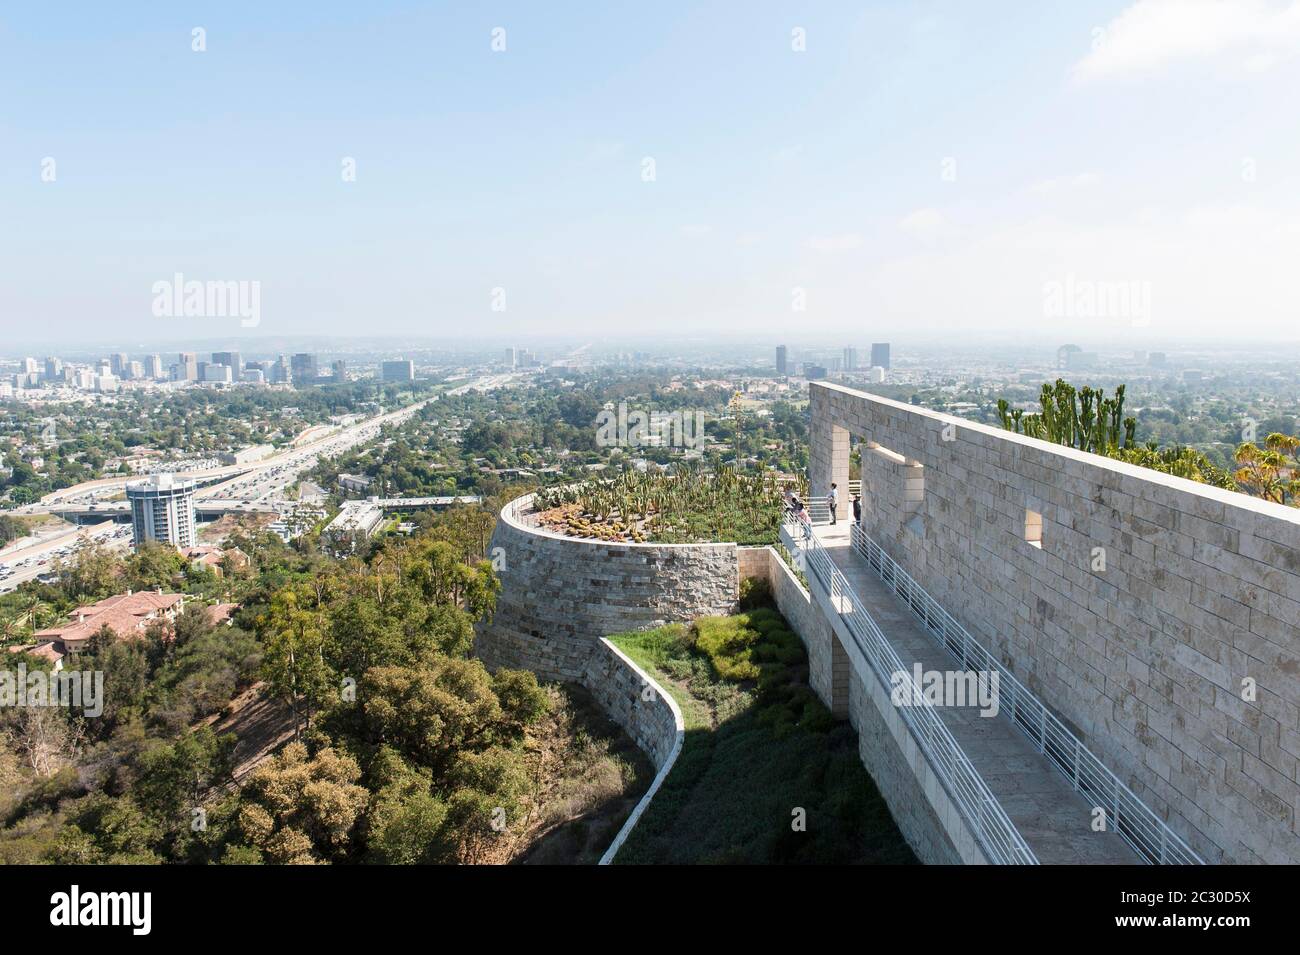 View of cactus garden and downtown from the Getty Center in Brentwood, J. Paul Getty Museum, Los Angeles, Los Angeles, California, USA Stock Photo